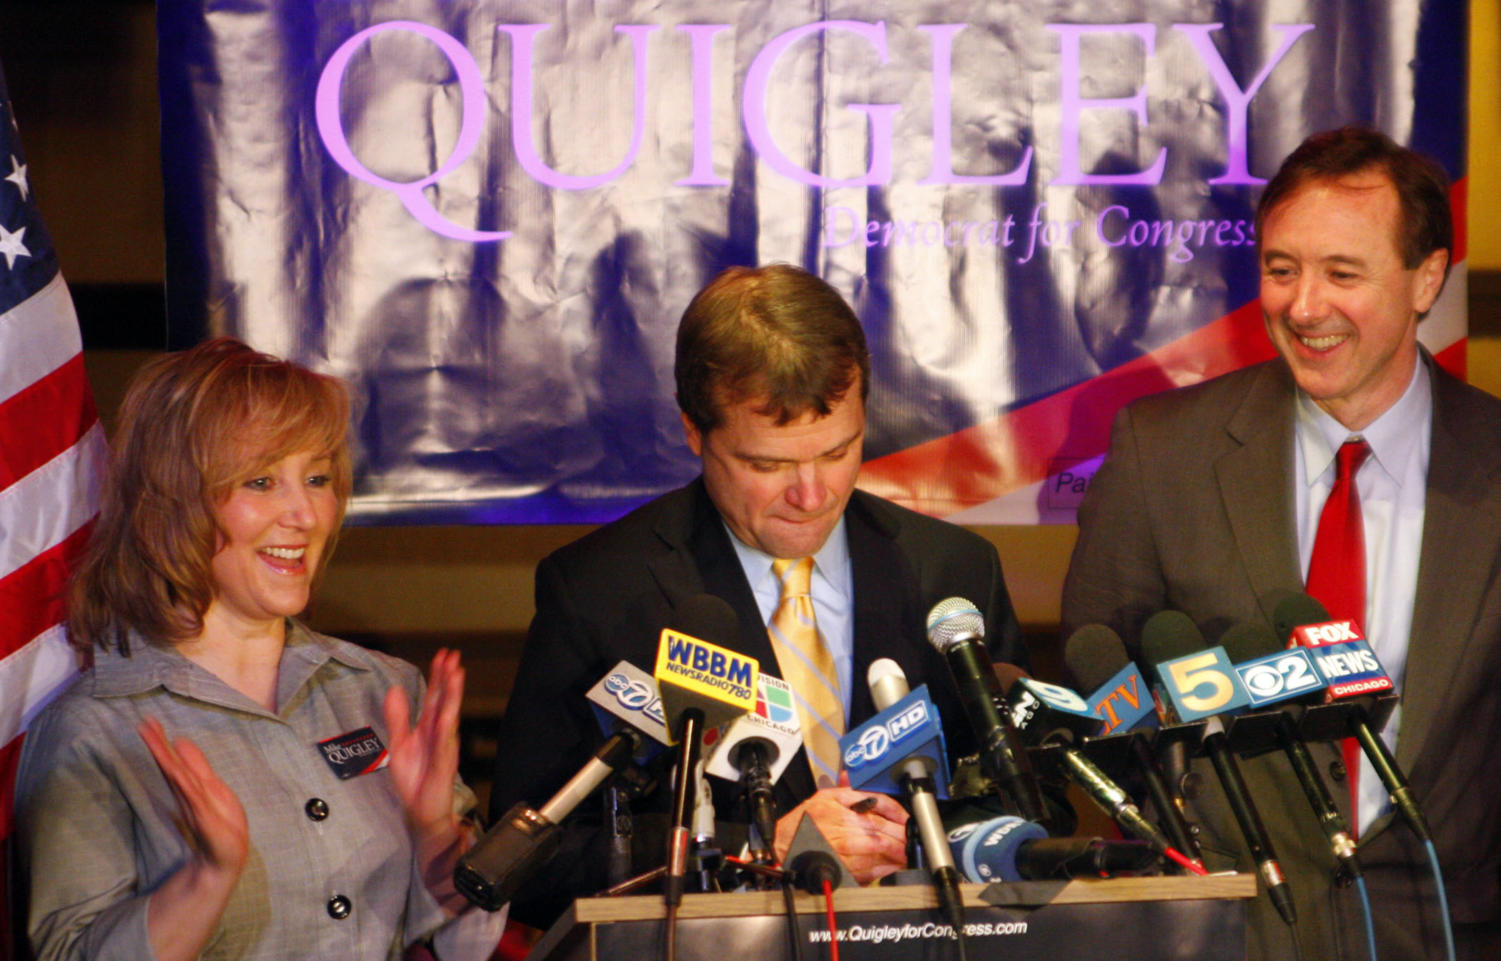 Mike Quigley (center) gives his victory speech for Illinois's 5th Congressional District Democrat primary, alongside his wife Barbara and Forrest Claypool, Cook Country Commissioner of the 12th District, Tuesday night at Red Ivy in Wrigleyville.